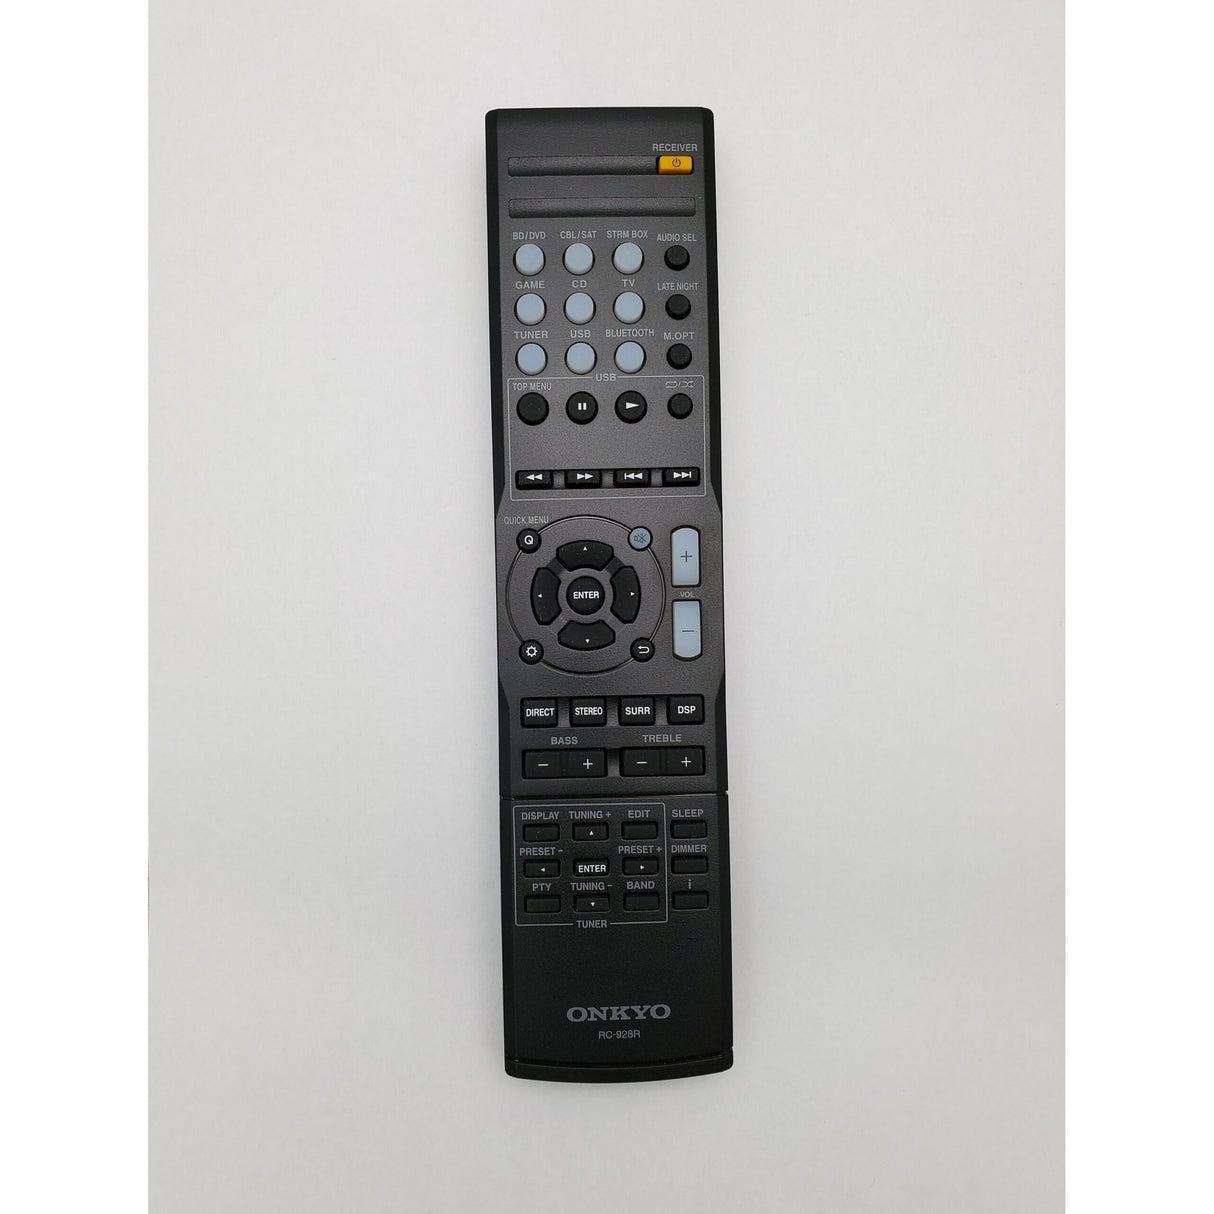 Onkyo RC-928R Replacement Remote Control for HT-S3800